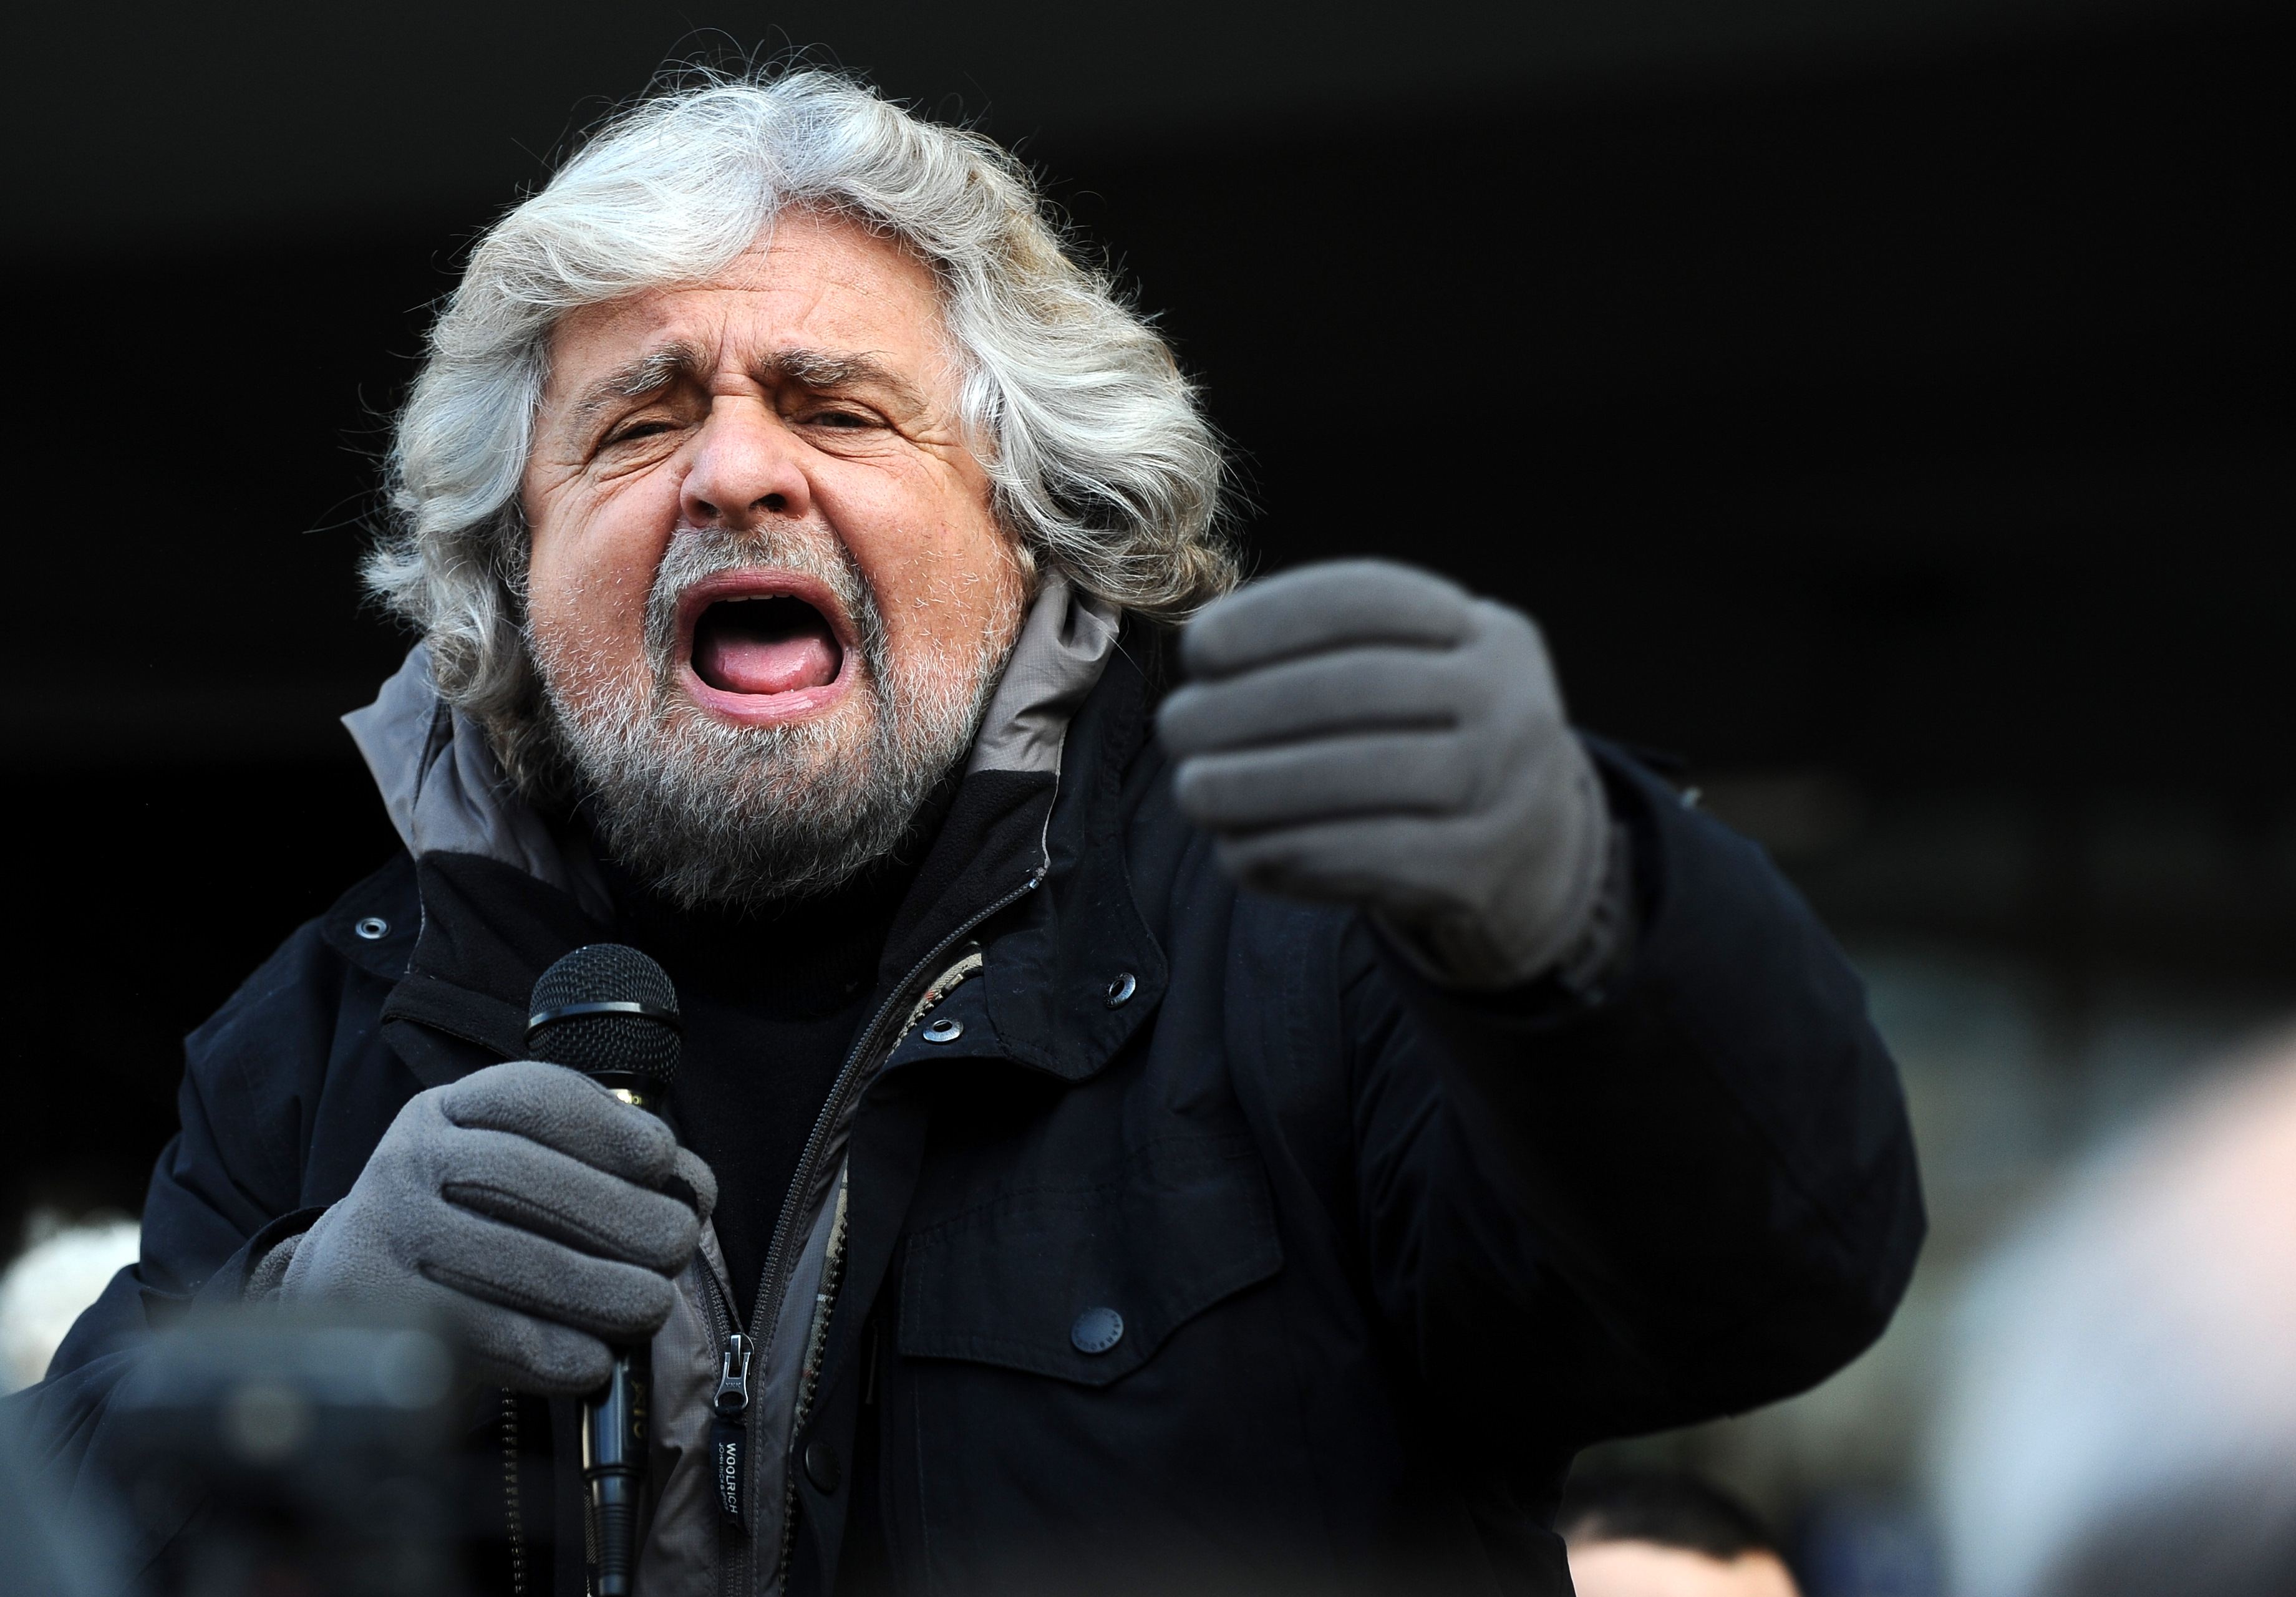 Beppe Grillo, the founder of the Five Star Movement. Photo by Niccolò Caranti